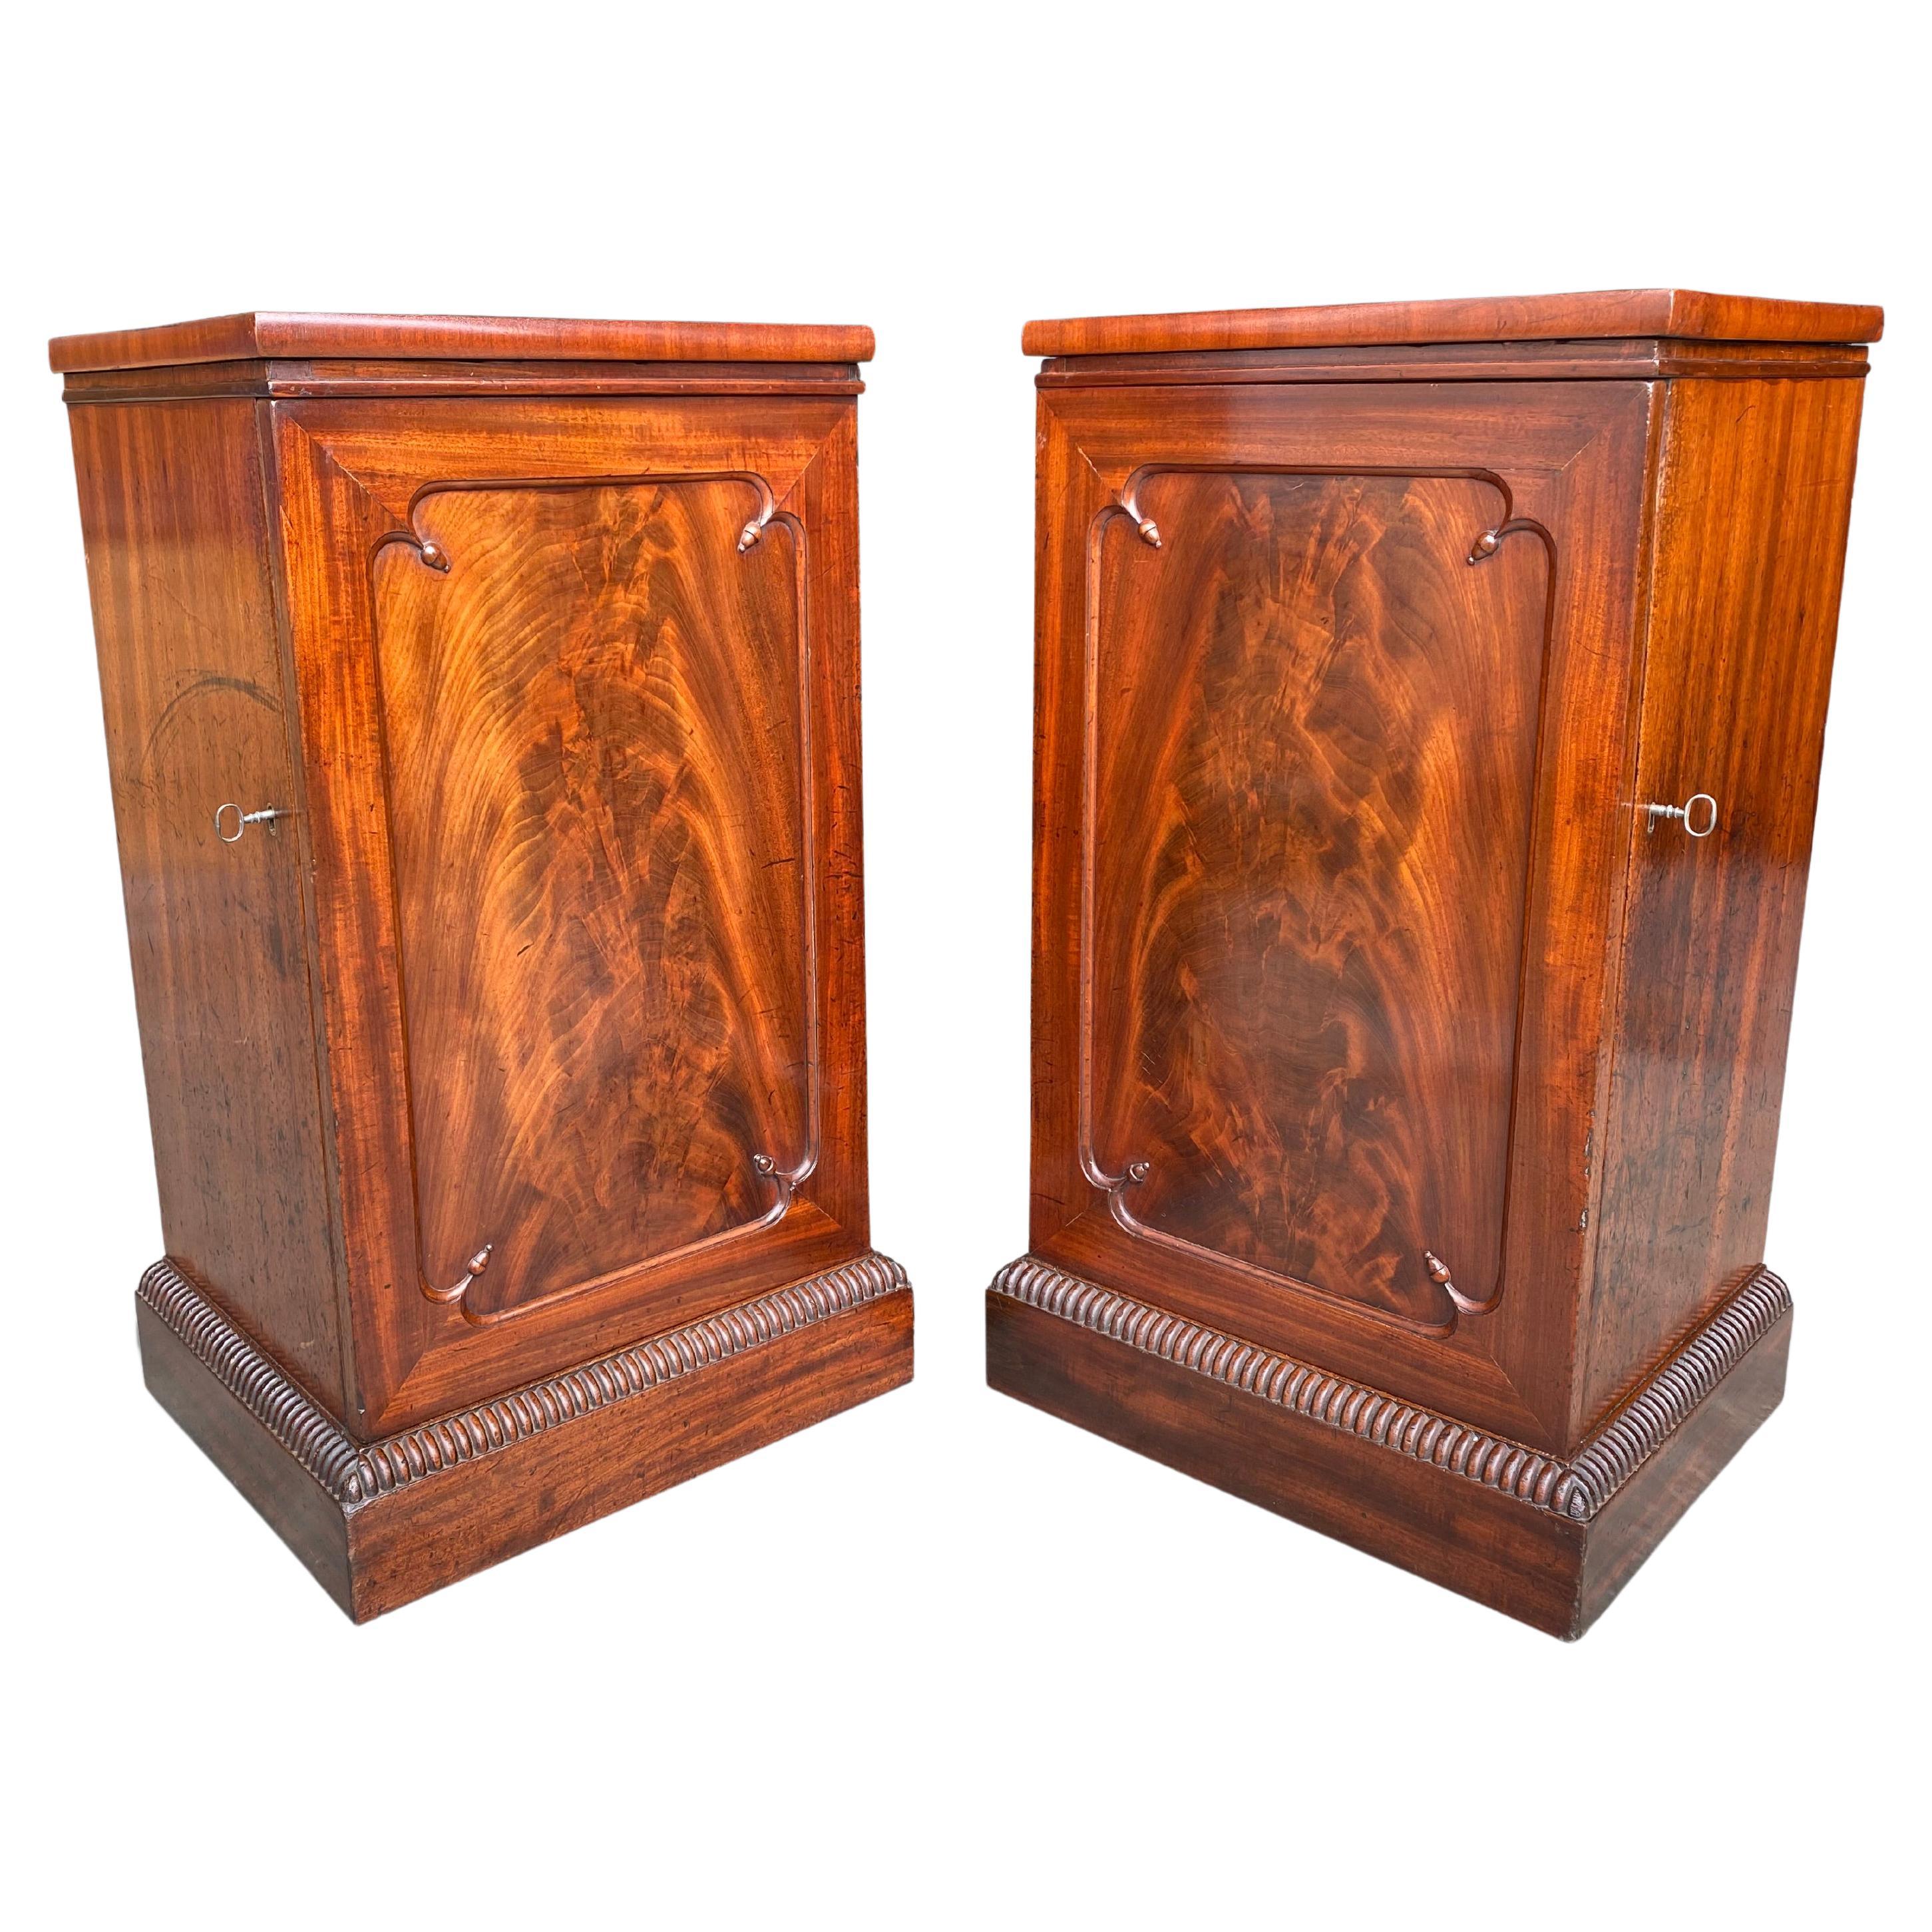 Pair of Early 19th Century George III Period Bedside Cabinets